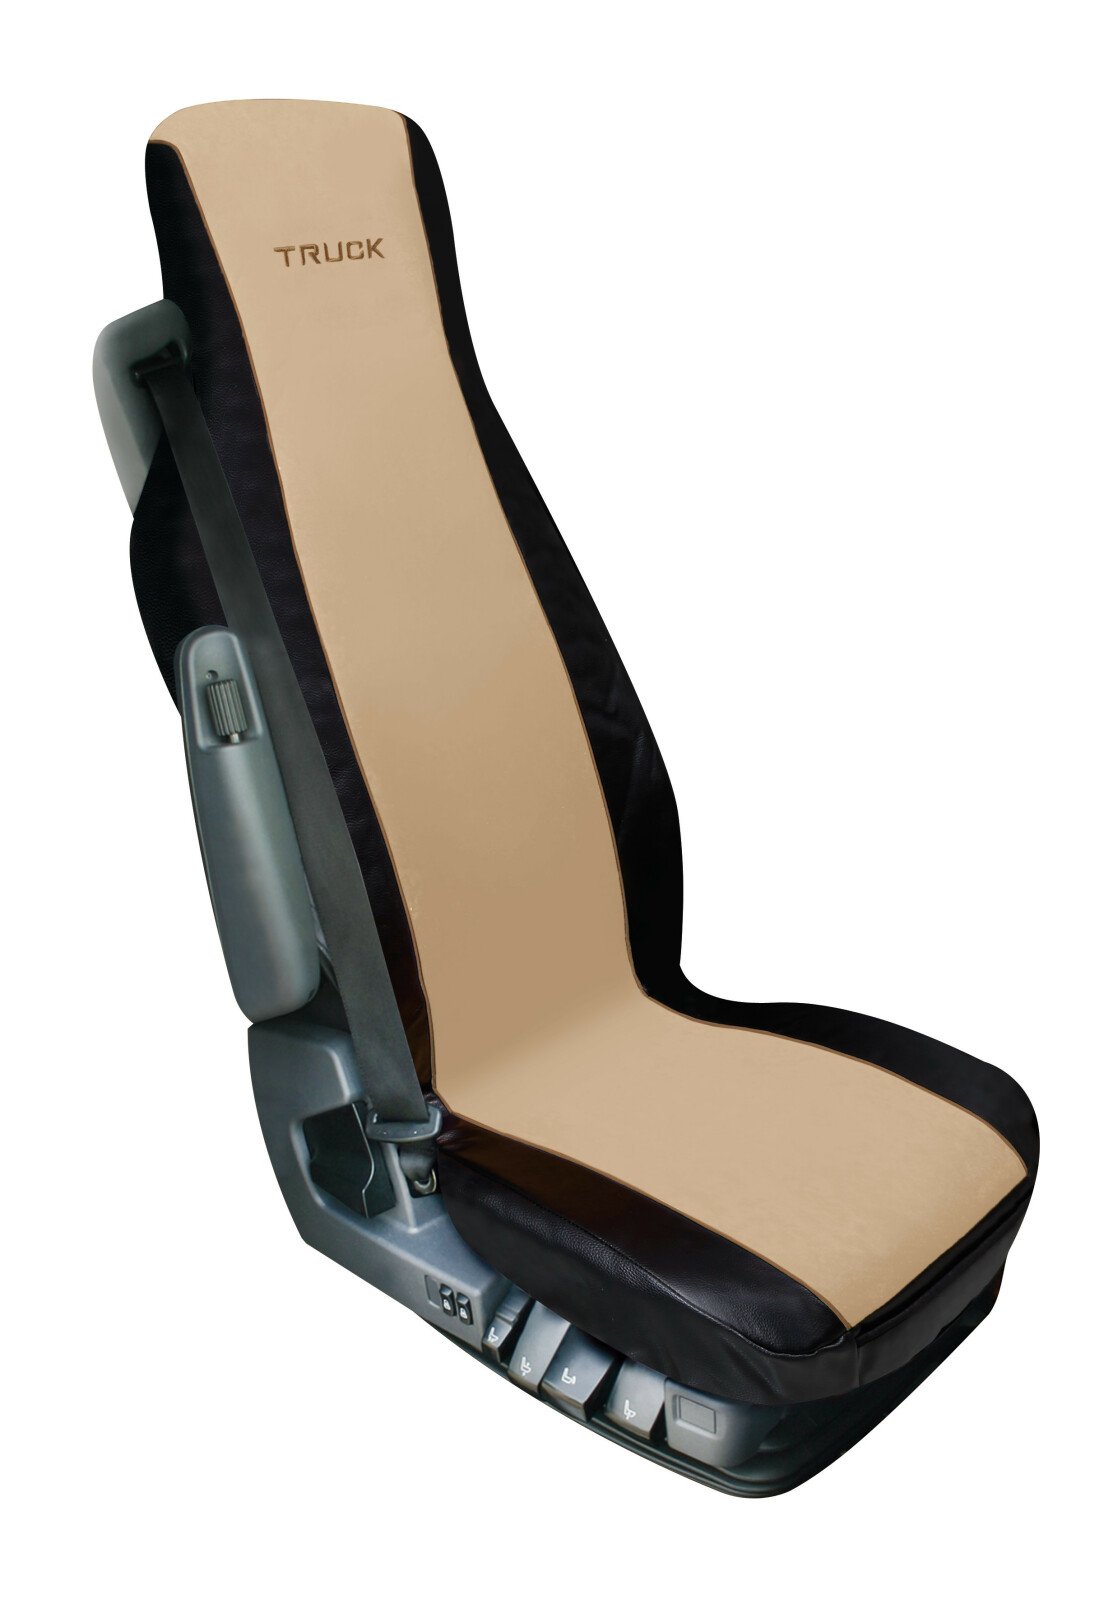 Elisa-2, polyester/leatherette truck seat cover - Beige/Black thumb